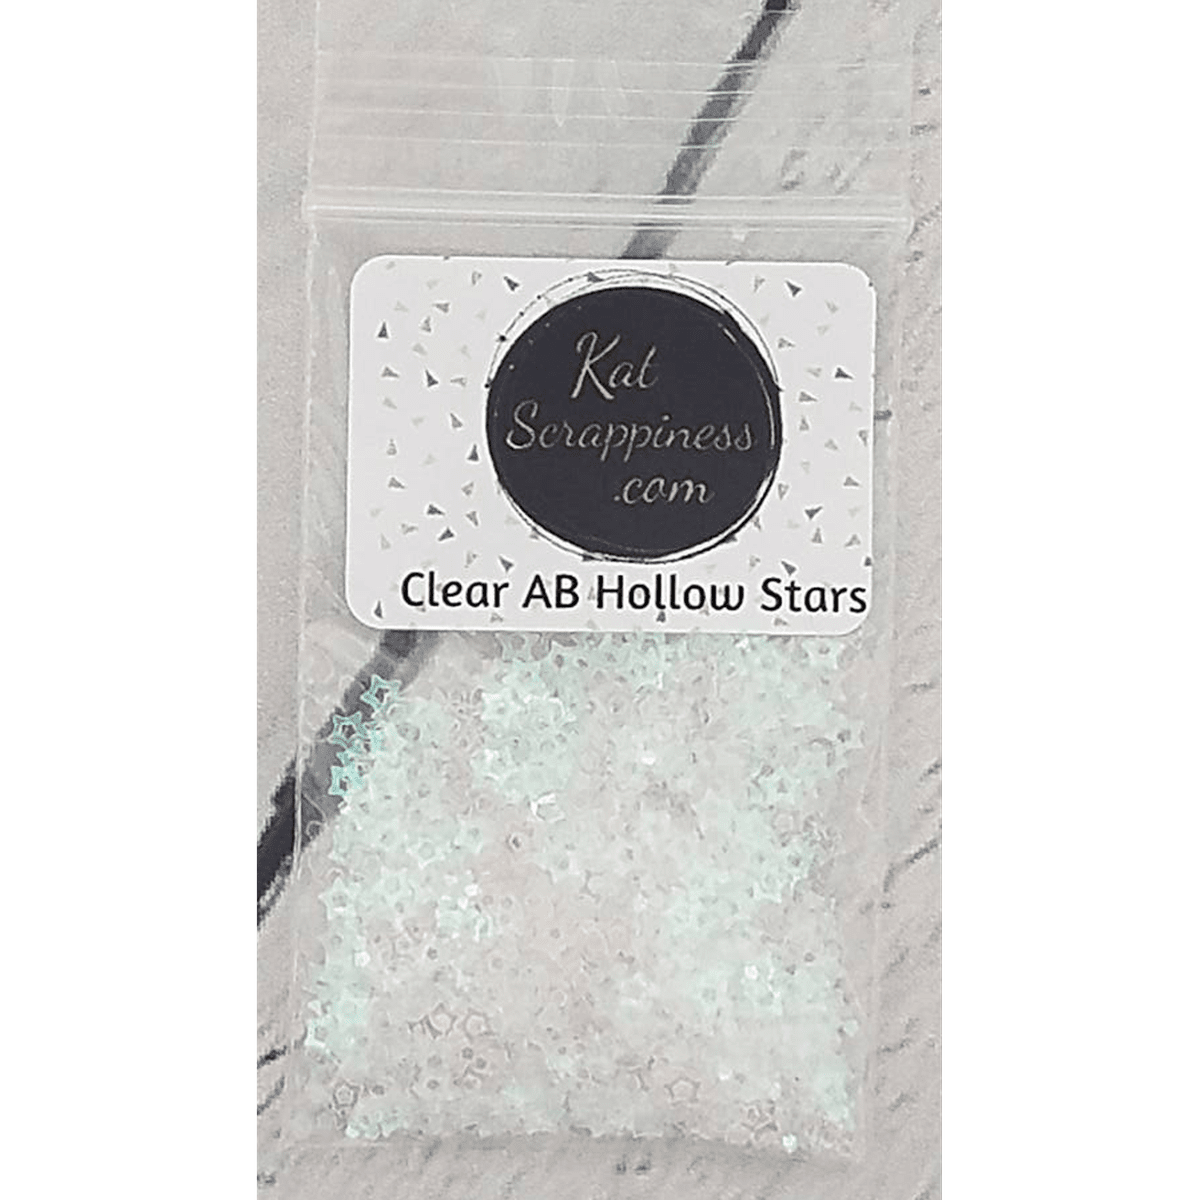 Clear AB Hollow Star Confetti Mix - Kat Scrappiness